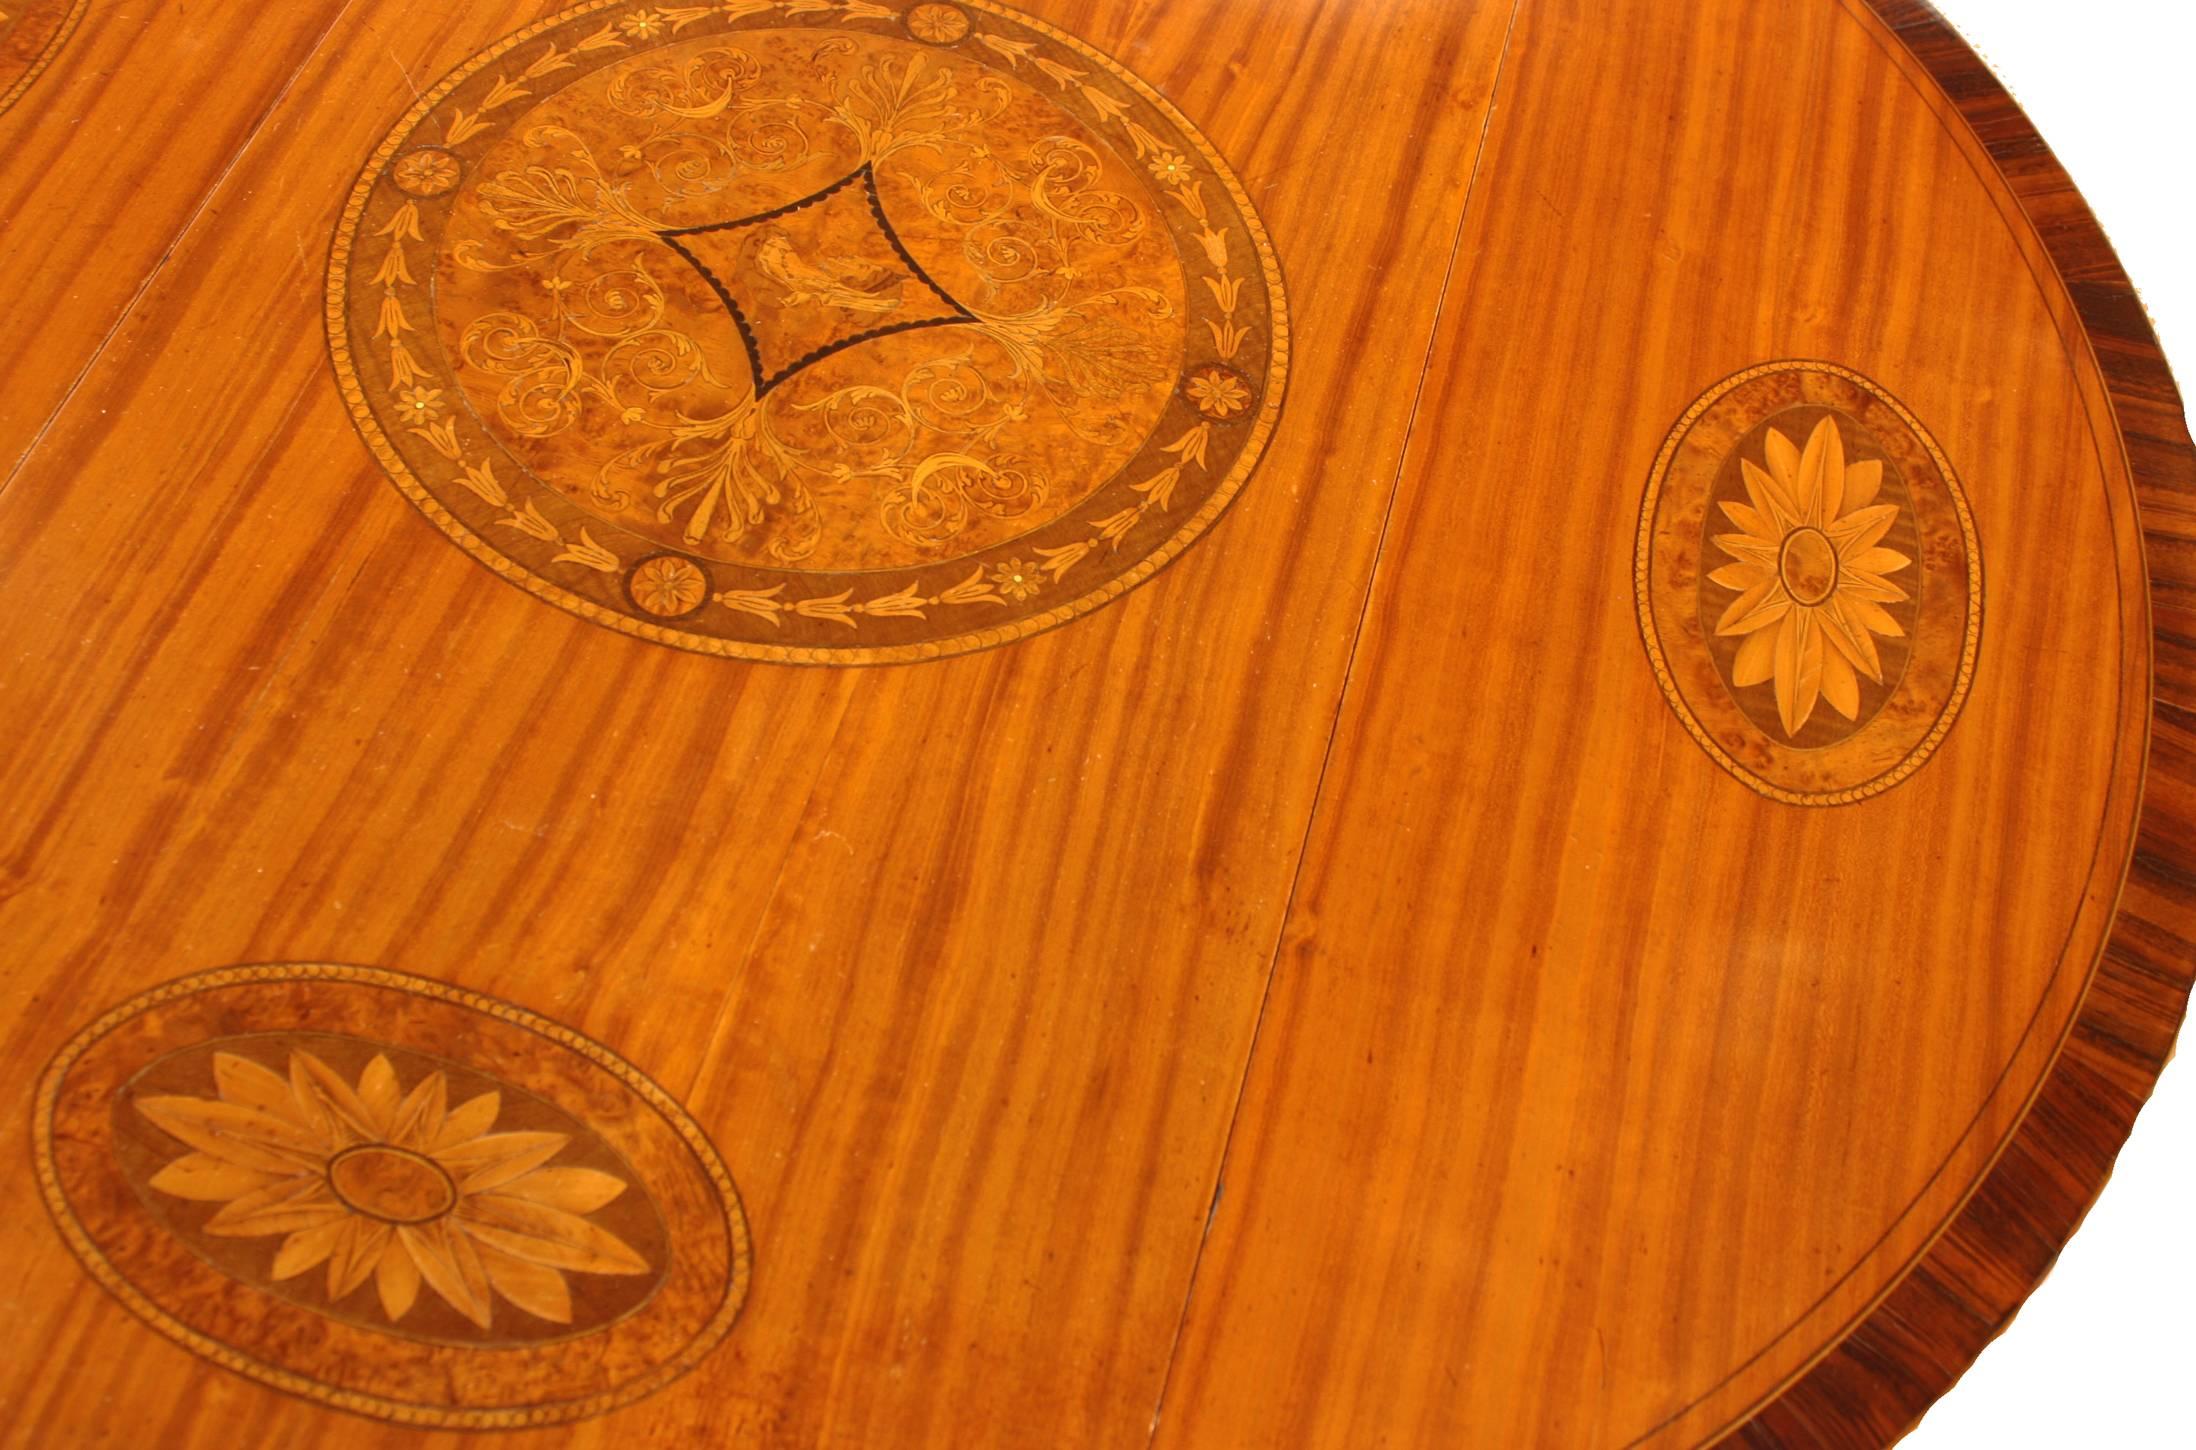 A Georgian Revival George III style Pembroke table of satinwood with rosewood crossbanded border, Features a center cartouche of Grecian woman's side portrait, outlined by thick ebony stringing in a diamond shape within a large round medallion of